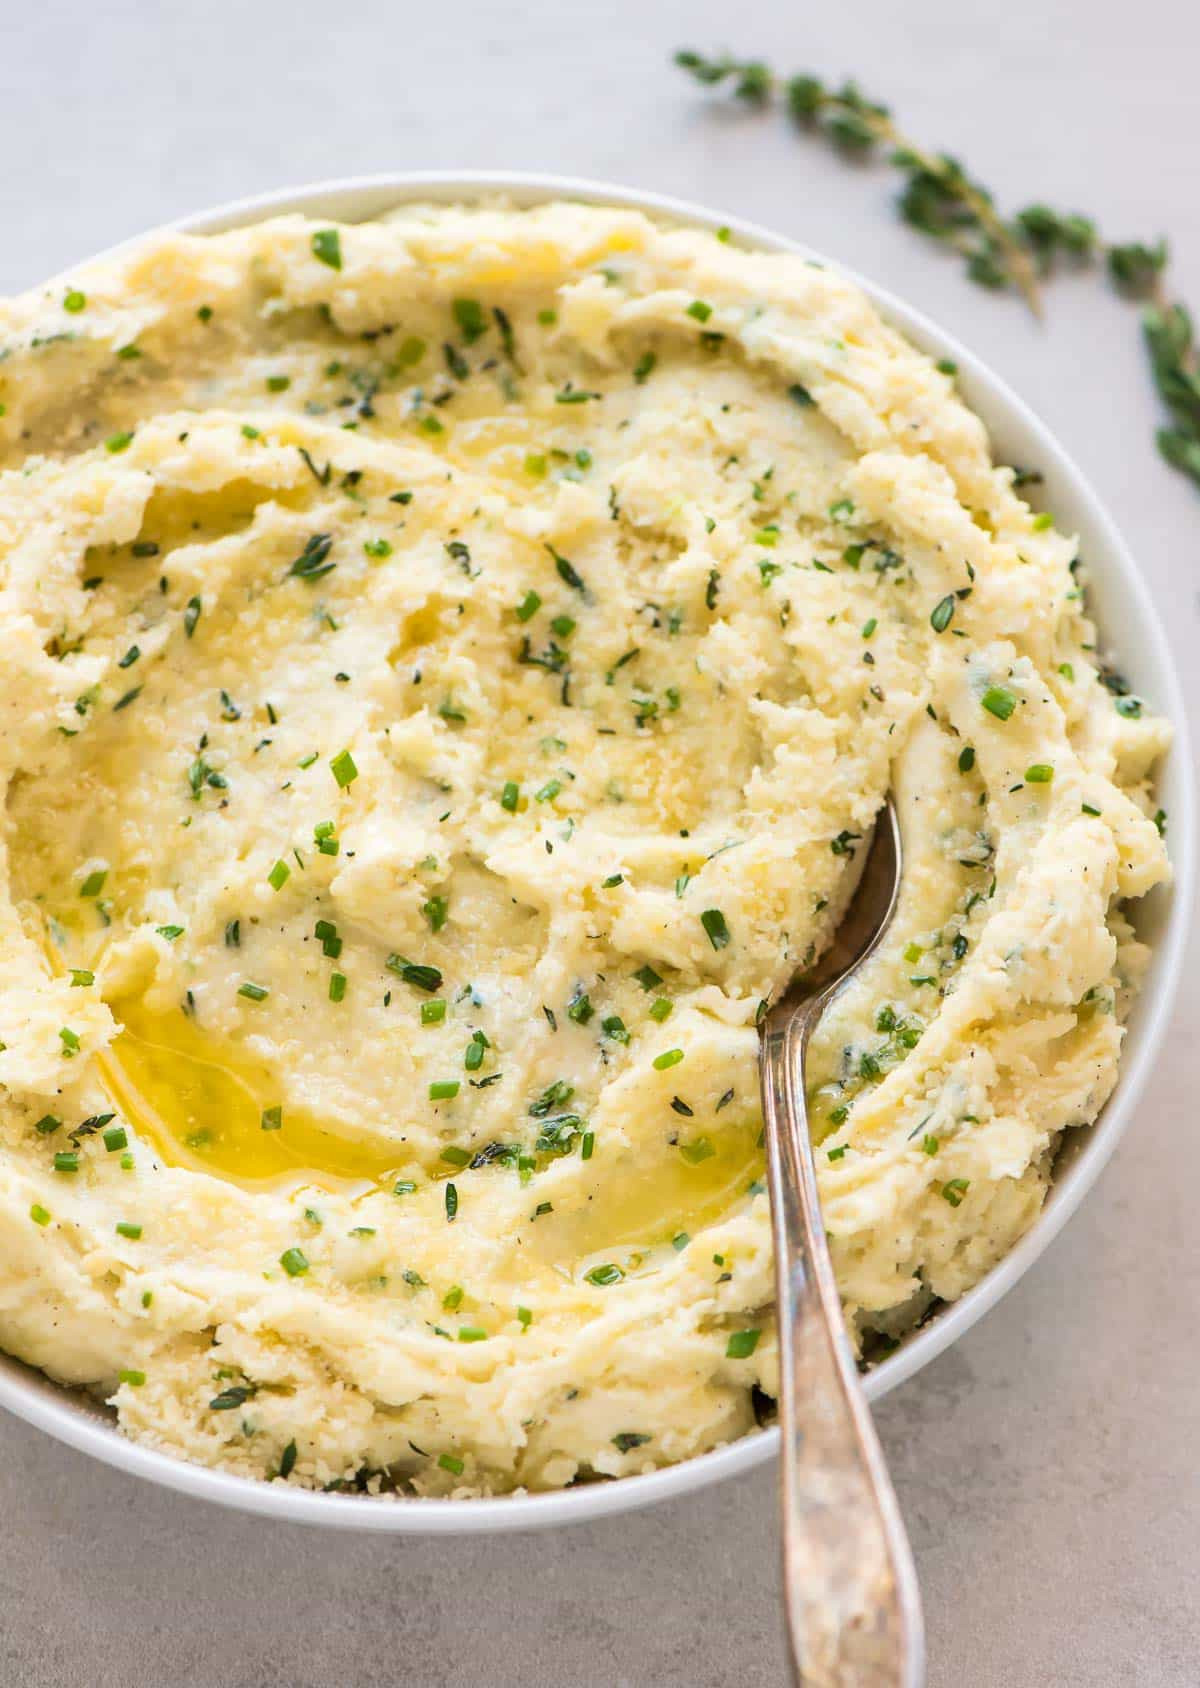 Instant Pot Mashed Potatoes Recipe Awesome Instant Pot Mashed Potatoes